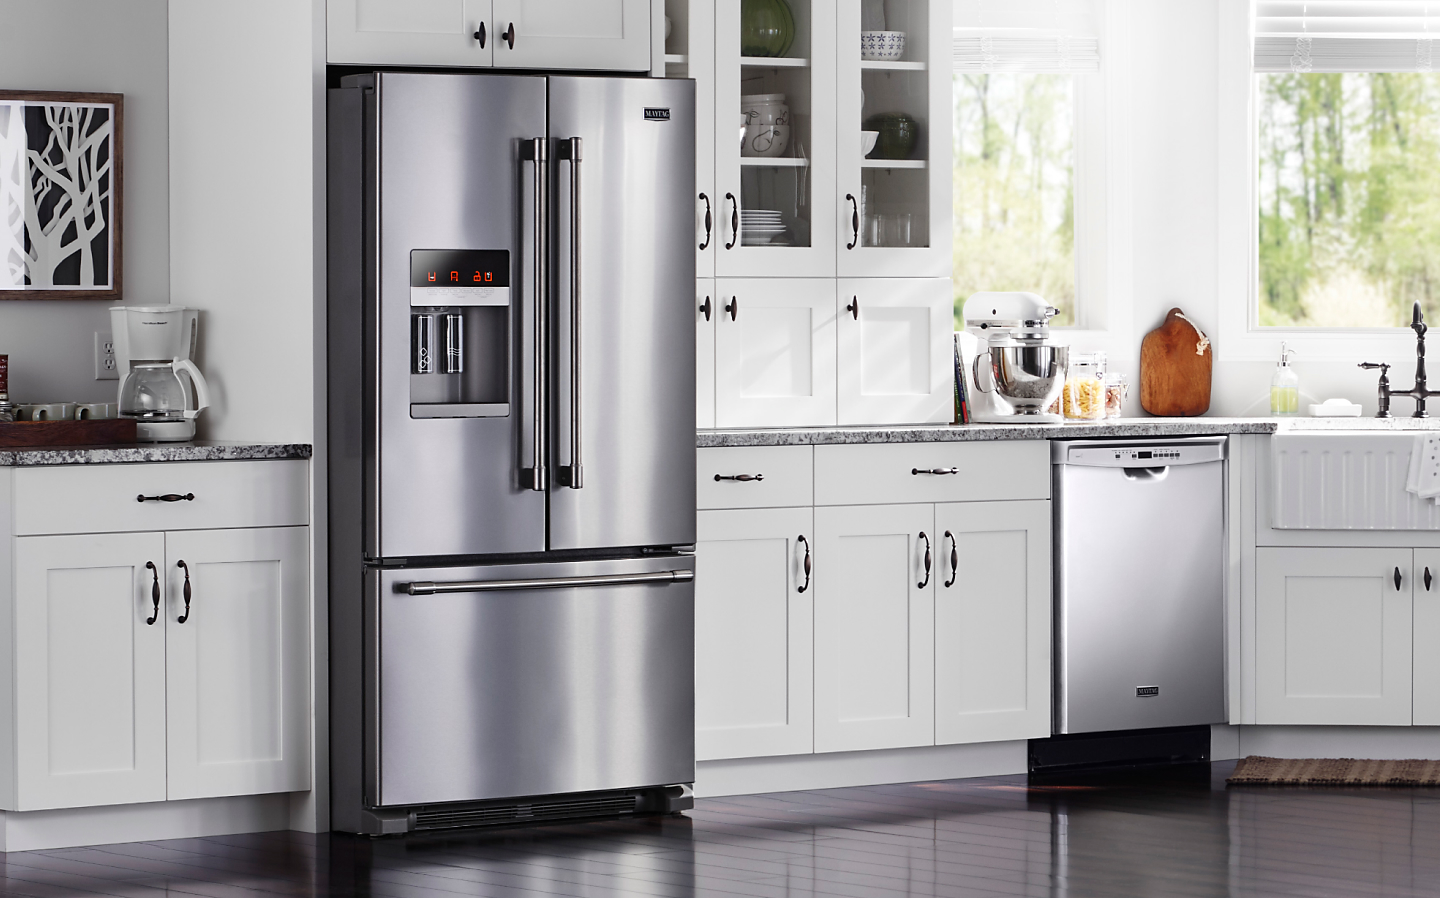 Stainless steel Maytag® French door refrigerator